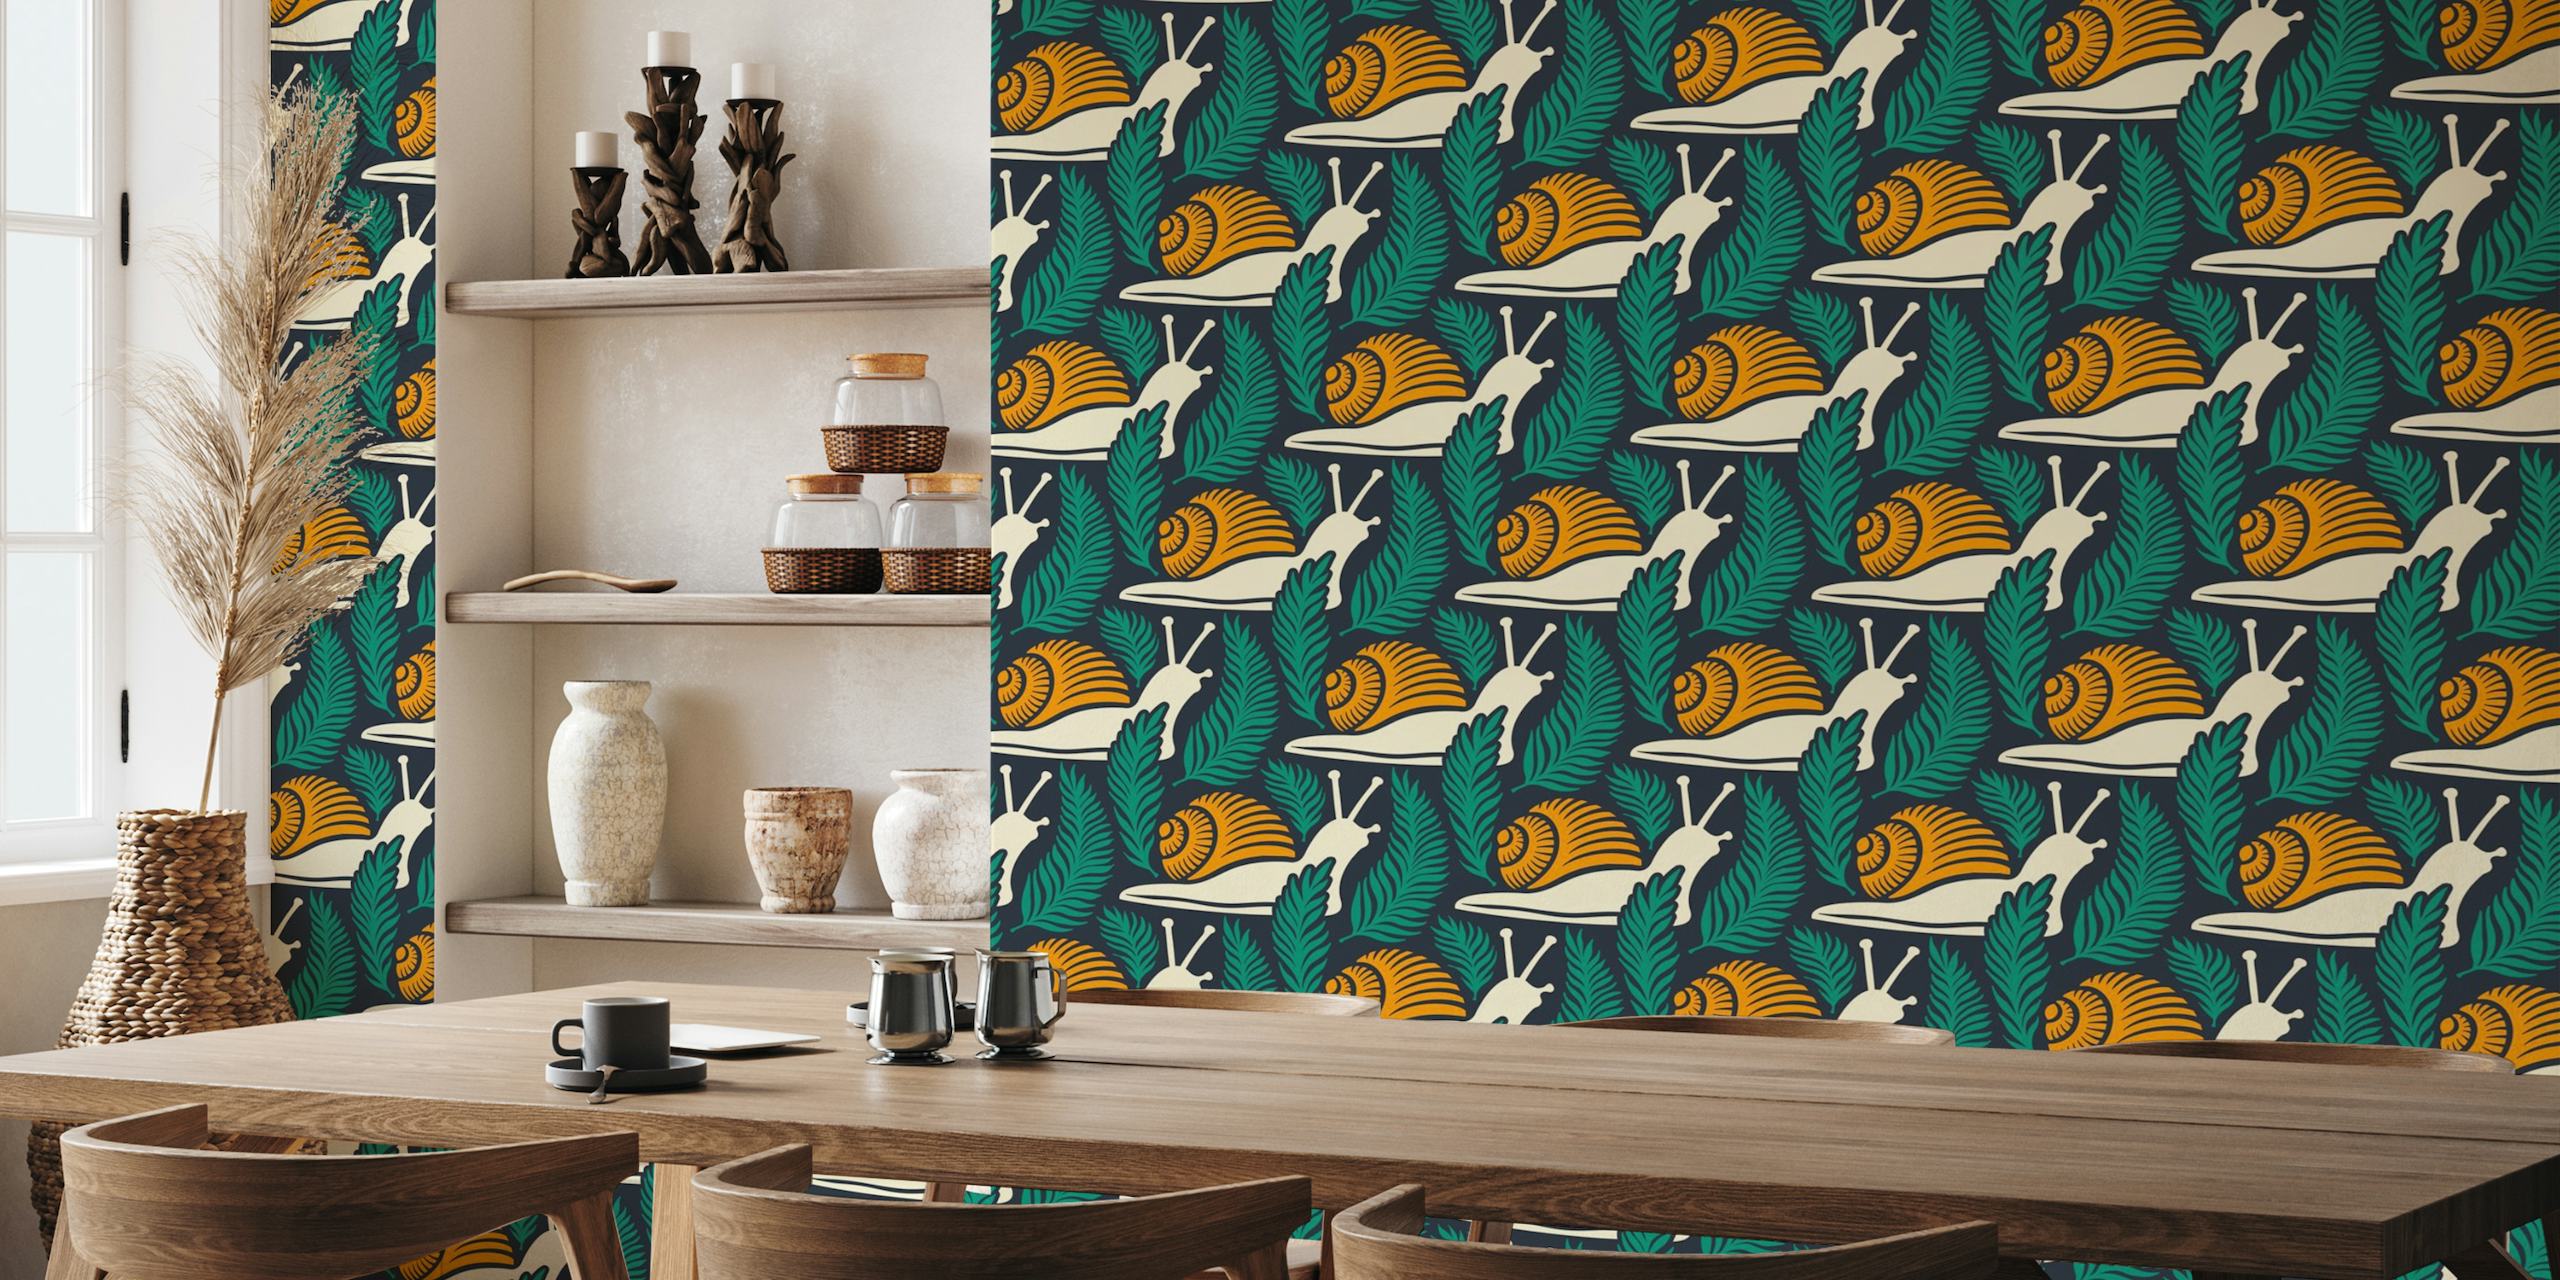 Snails in ferns, teal yellow / 3001 A tapete